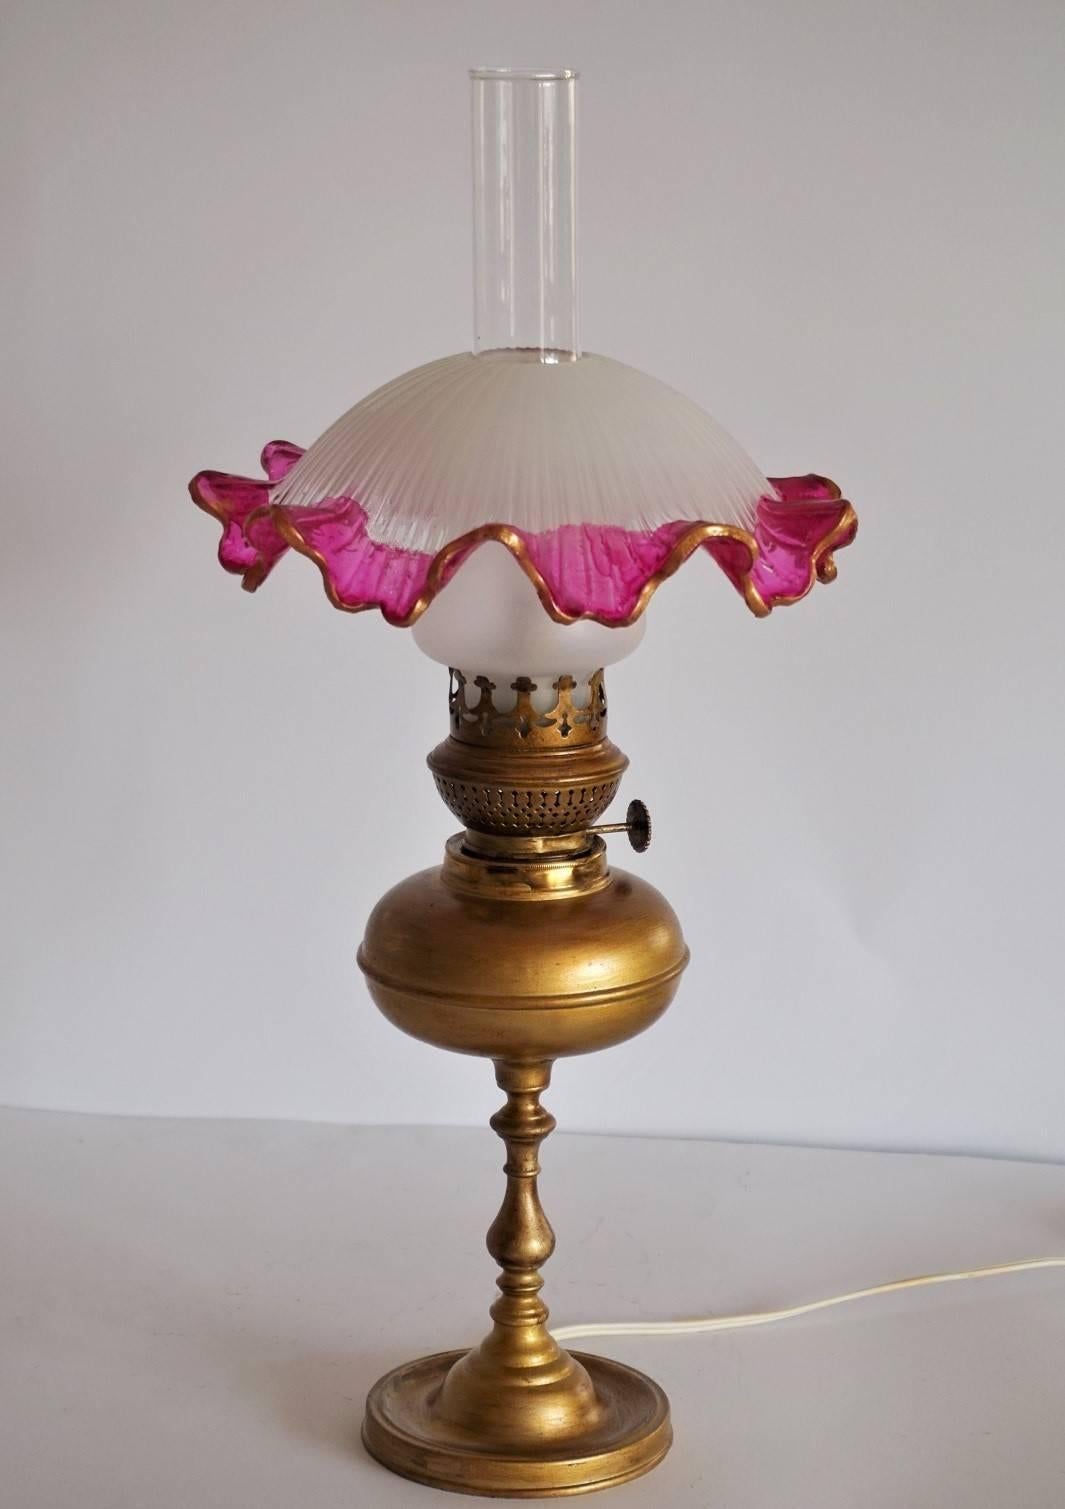 A lovely Art Nouveau oil lamp converted to electric, brass and a beautiful etched glass shade and hurricane chimney.
One E14 bulb light socket.
Measures: 
Height 19.25 in (49 cm)
Diameter 9.15 in (23 cm).